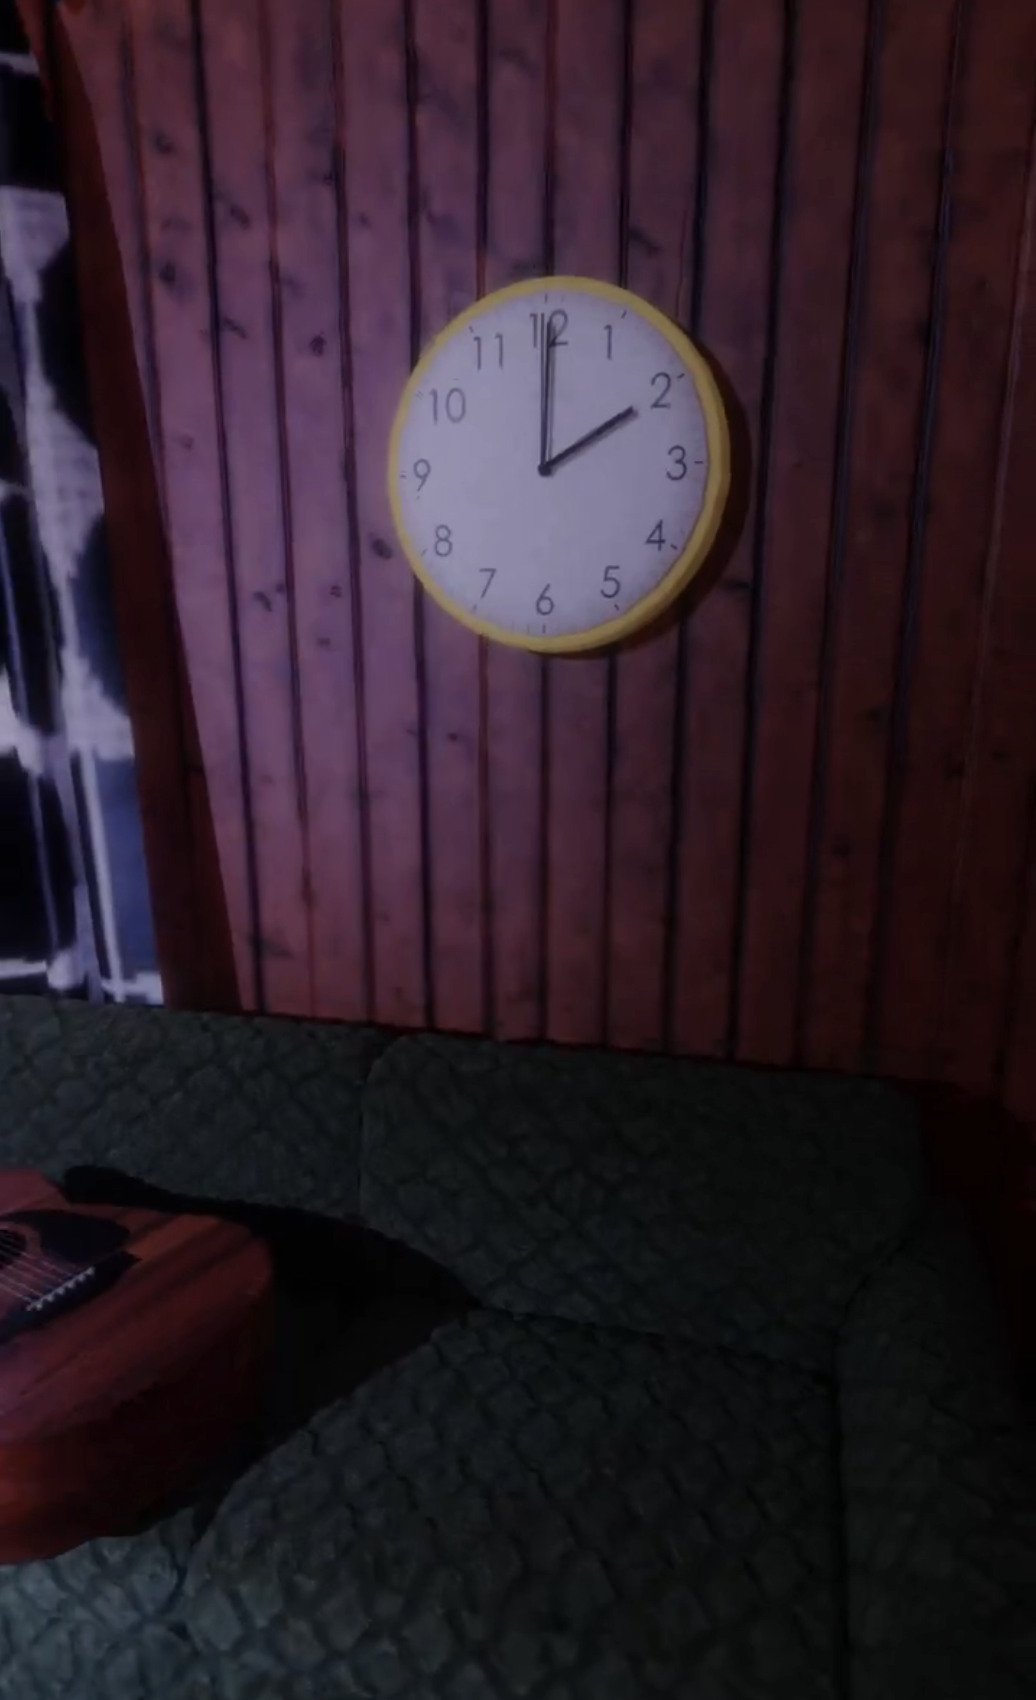 Analog clock showing time as 2 on wall above a quilted couch